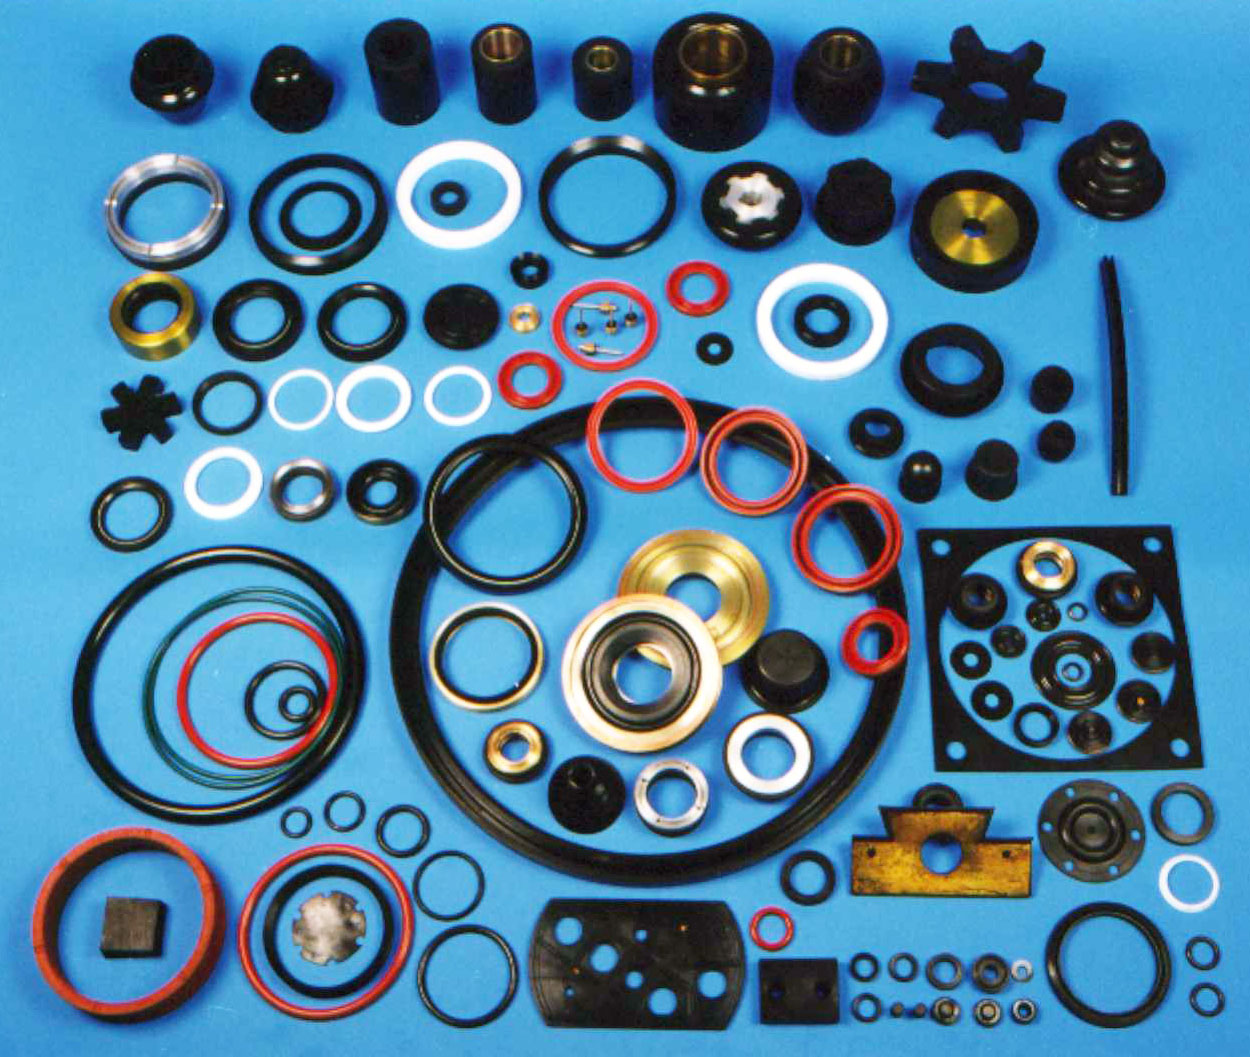 Seat Rings Suppliers In India | Alter Valve | Quality Parts